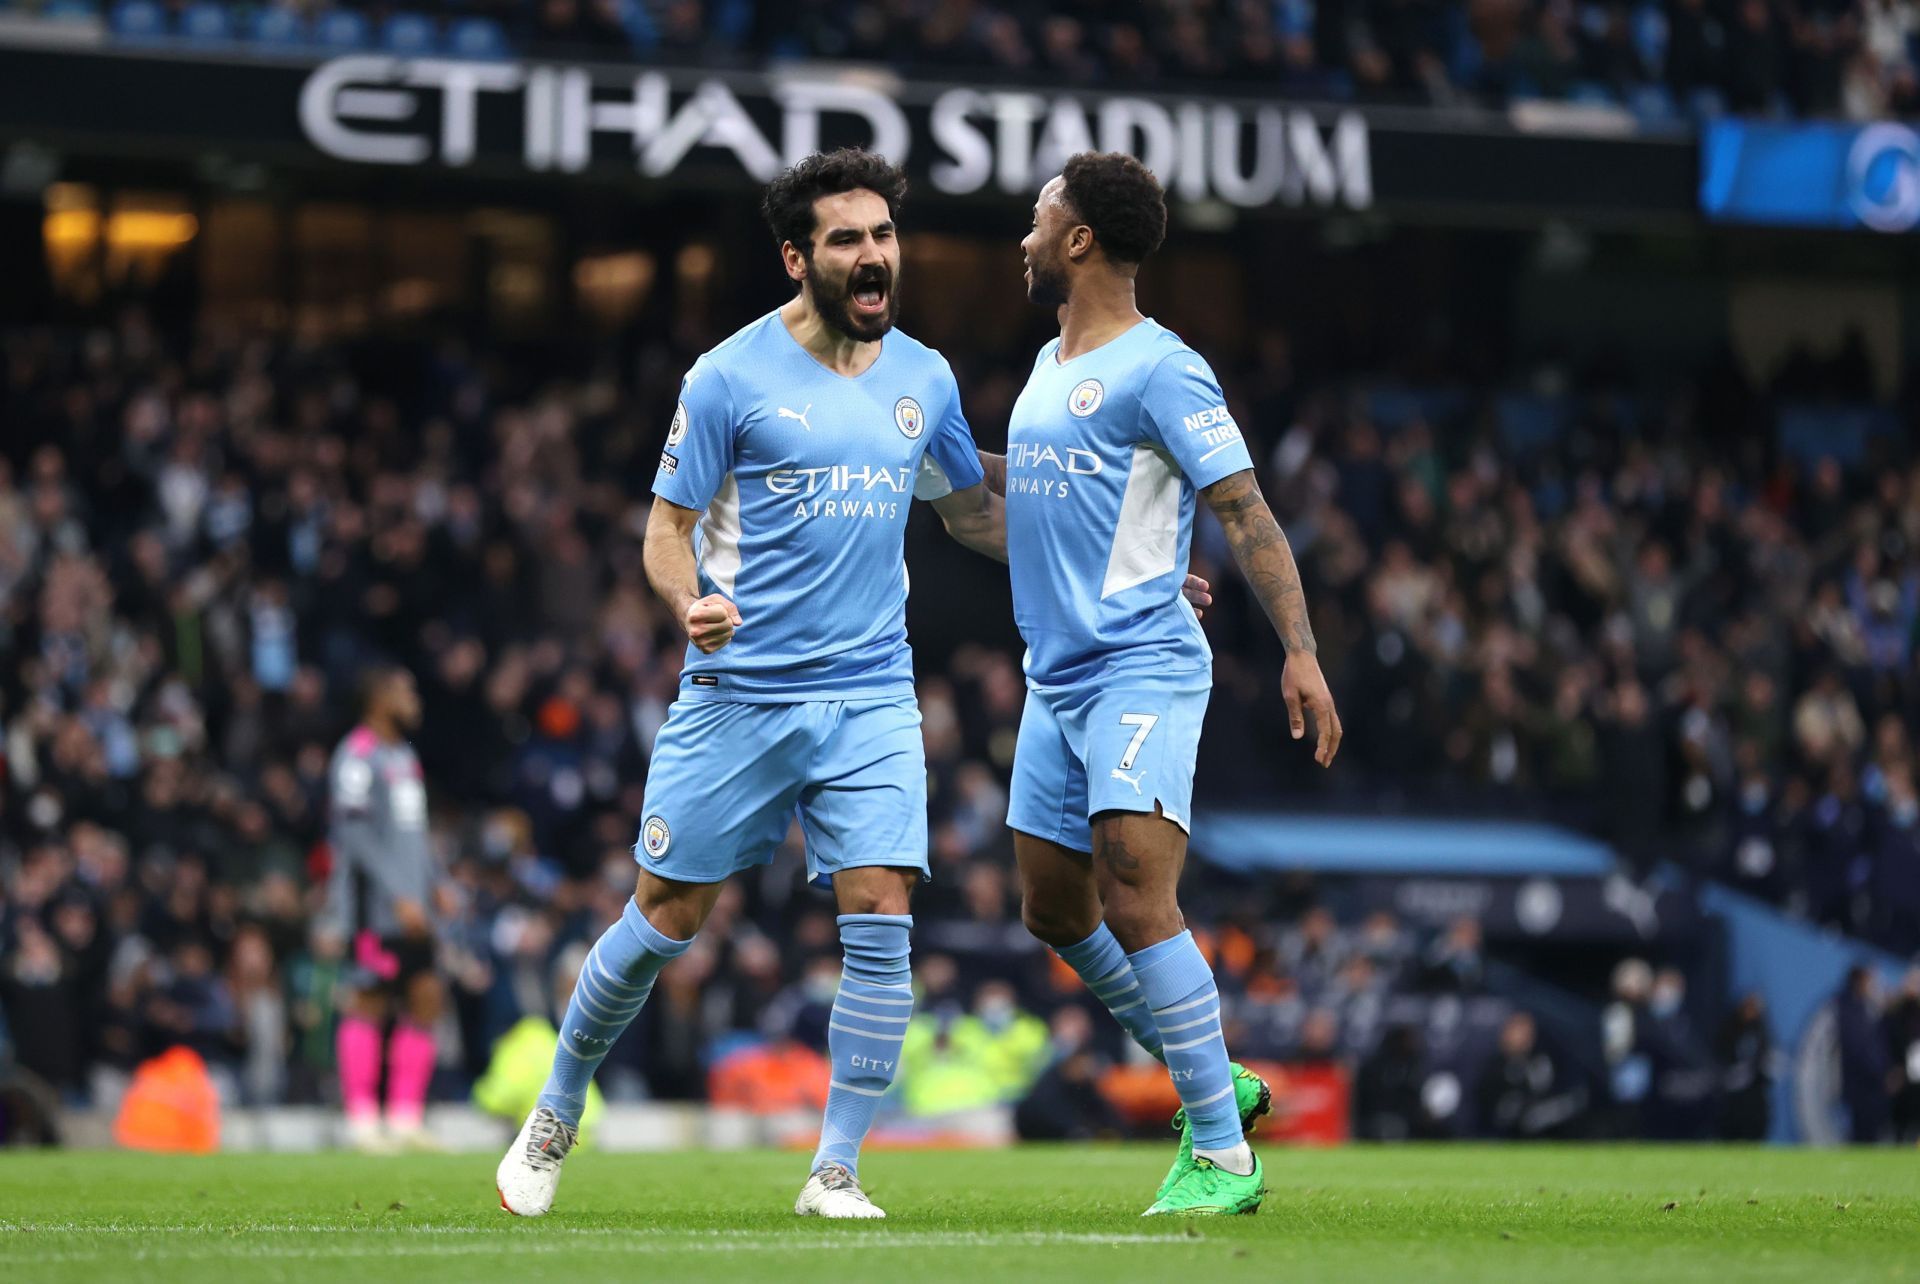 Manchester City are looking for their 10th consecutive league win